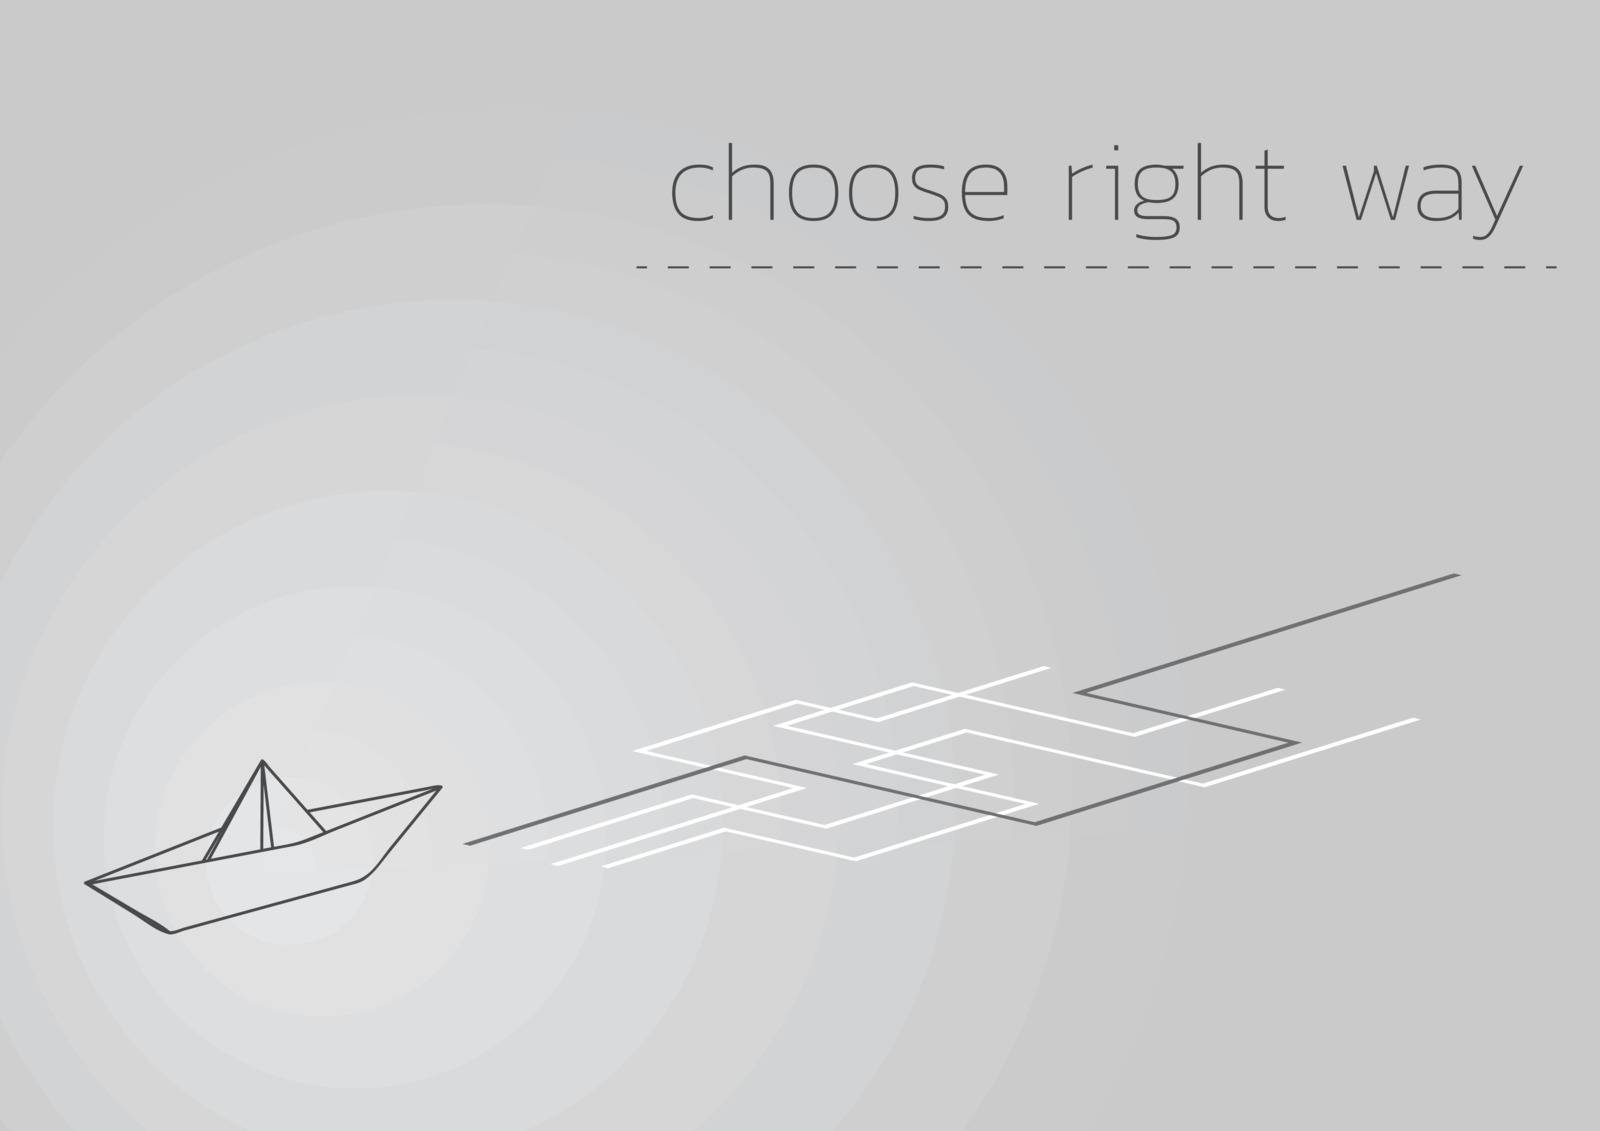 paper ship and choose right way by muuraa